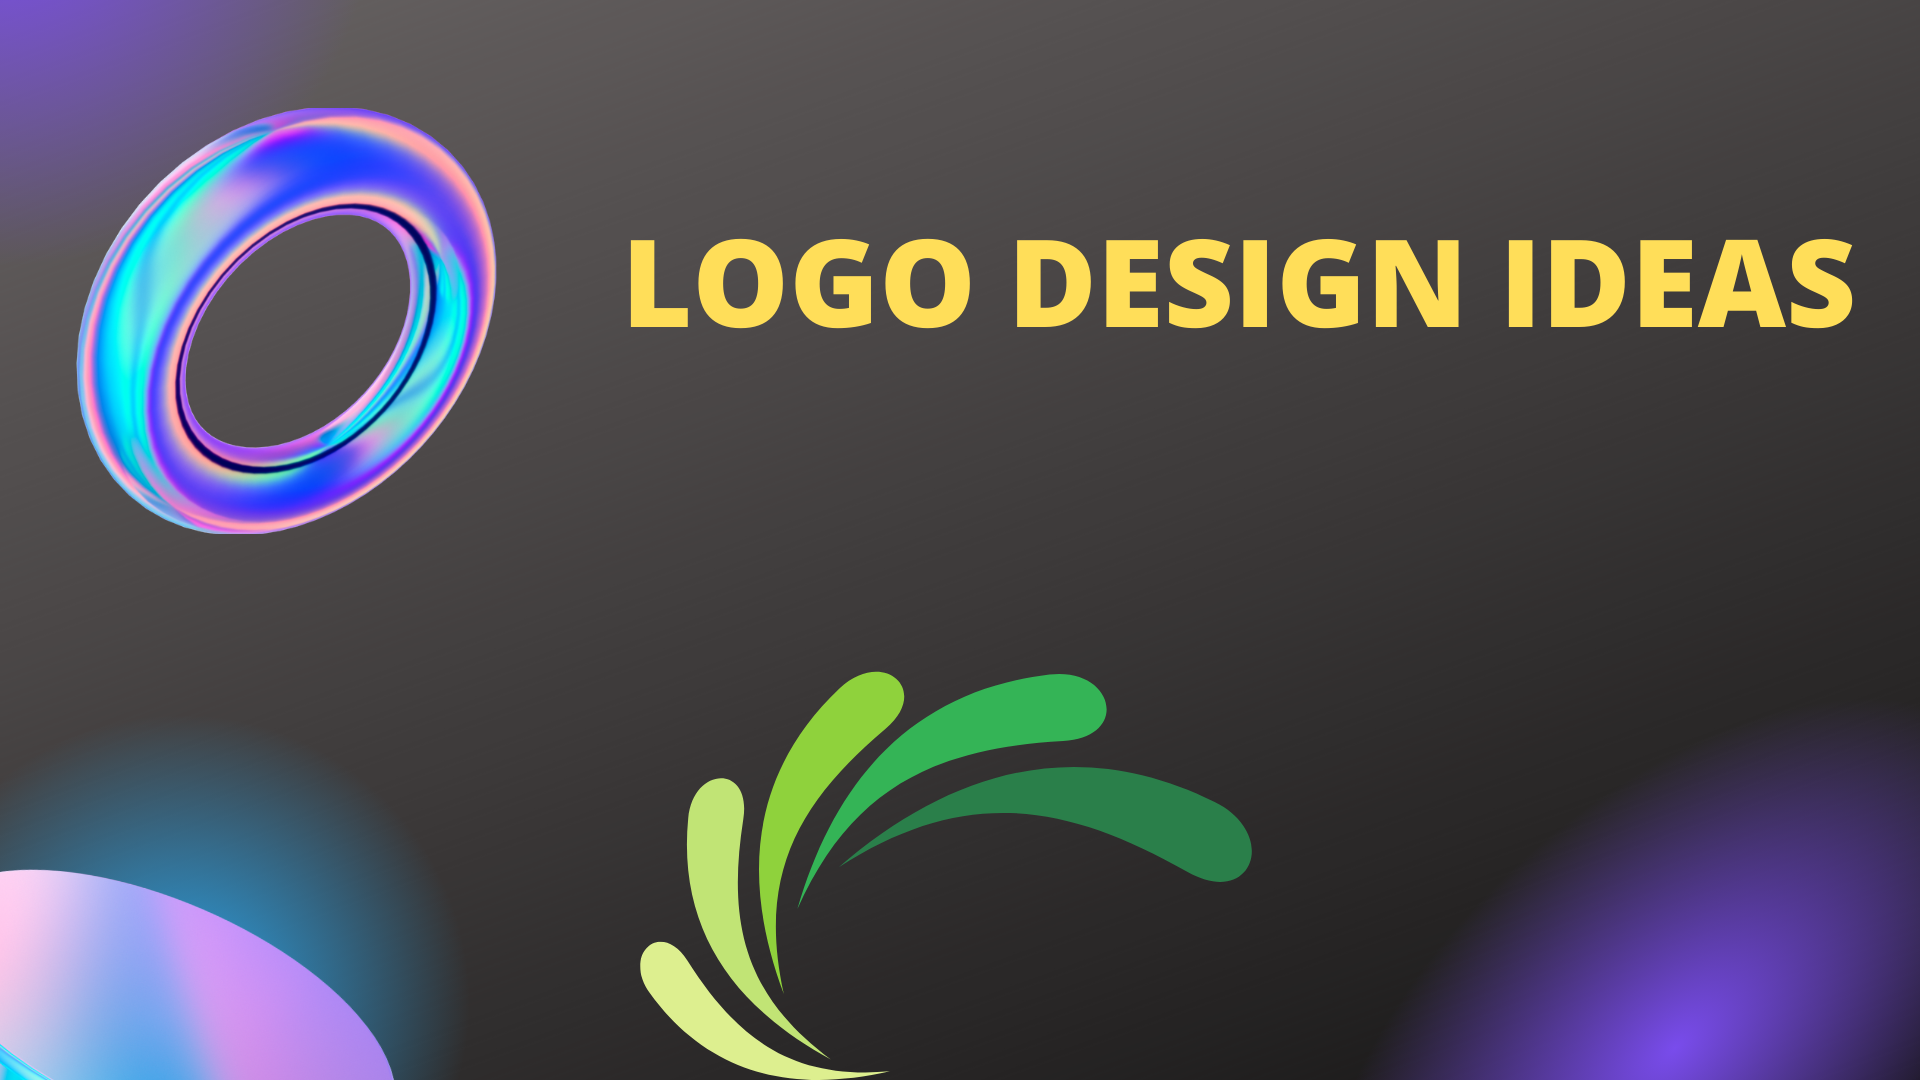 Defining the Services of Company With Online Logos